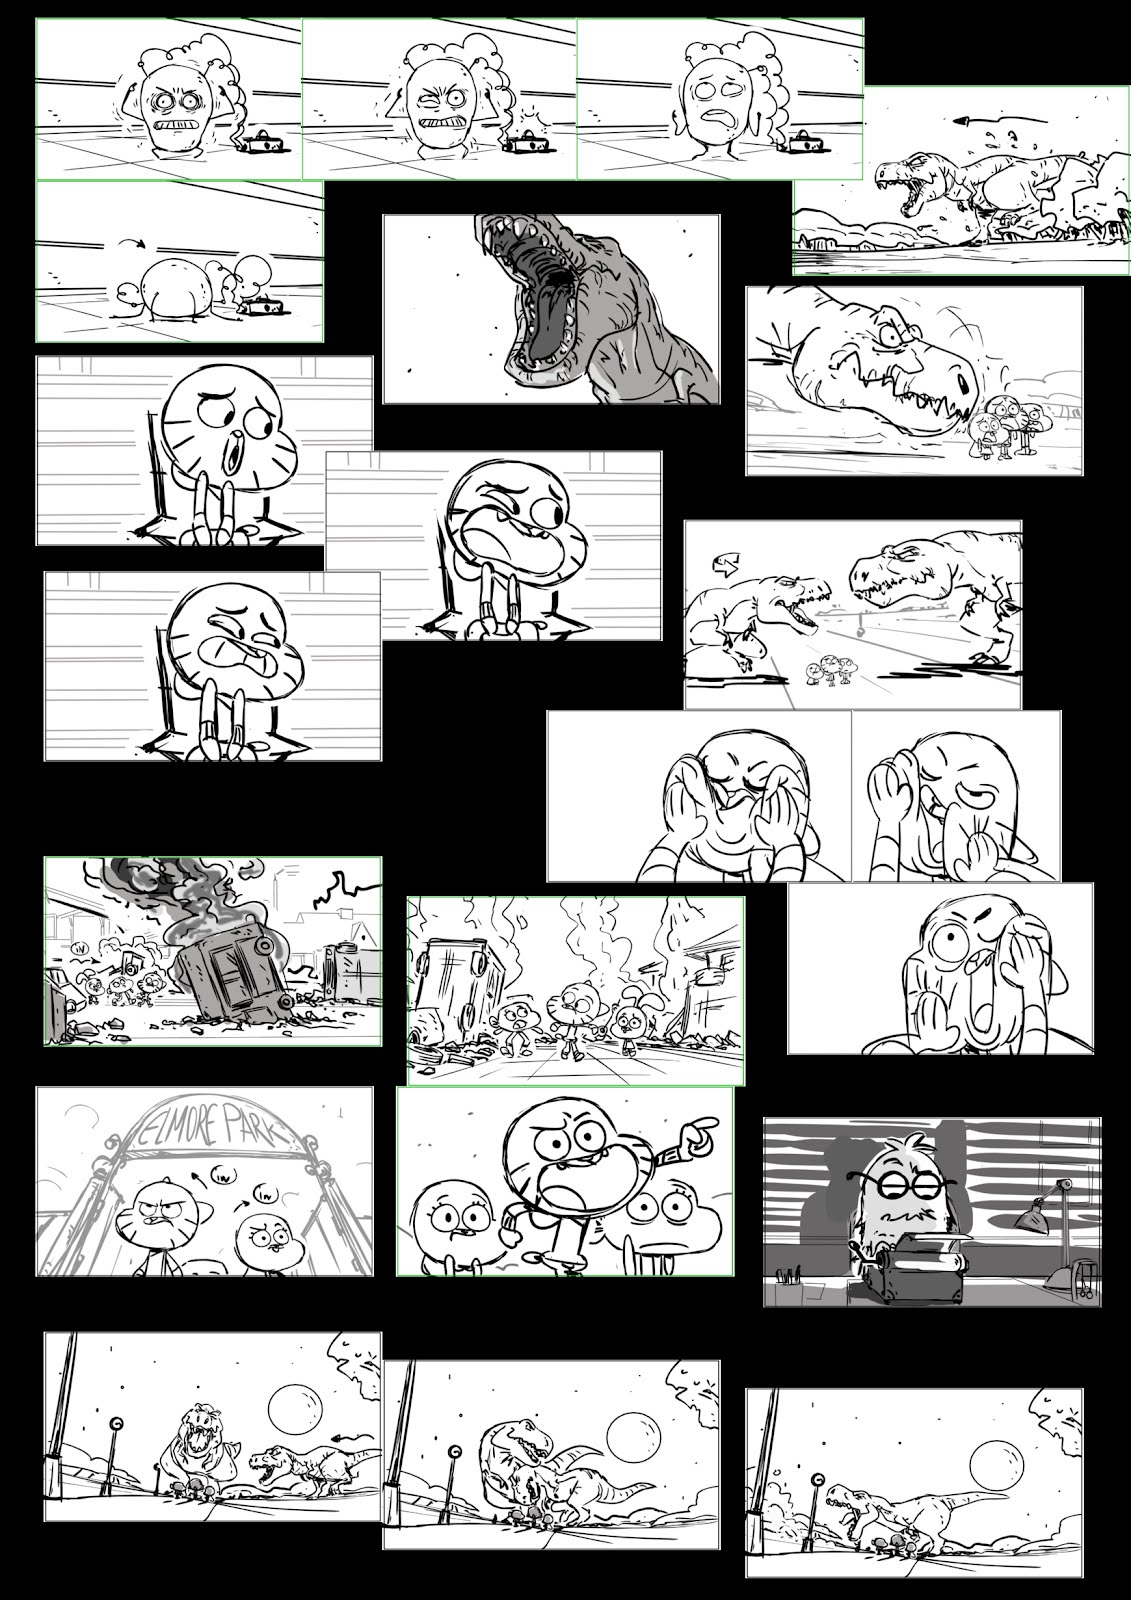 Production Art  World of gumball, The amazing world of gumball, Storyboard  drawing